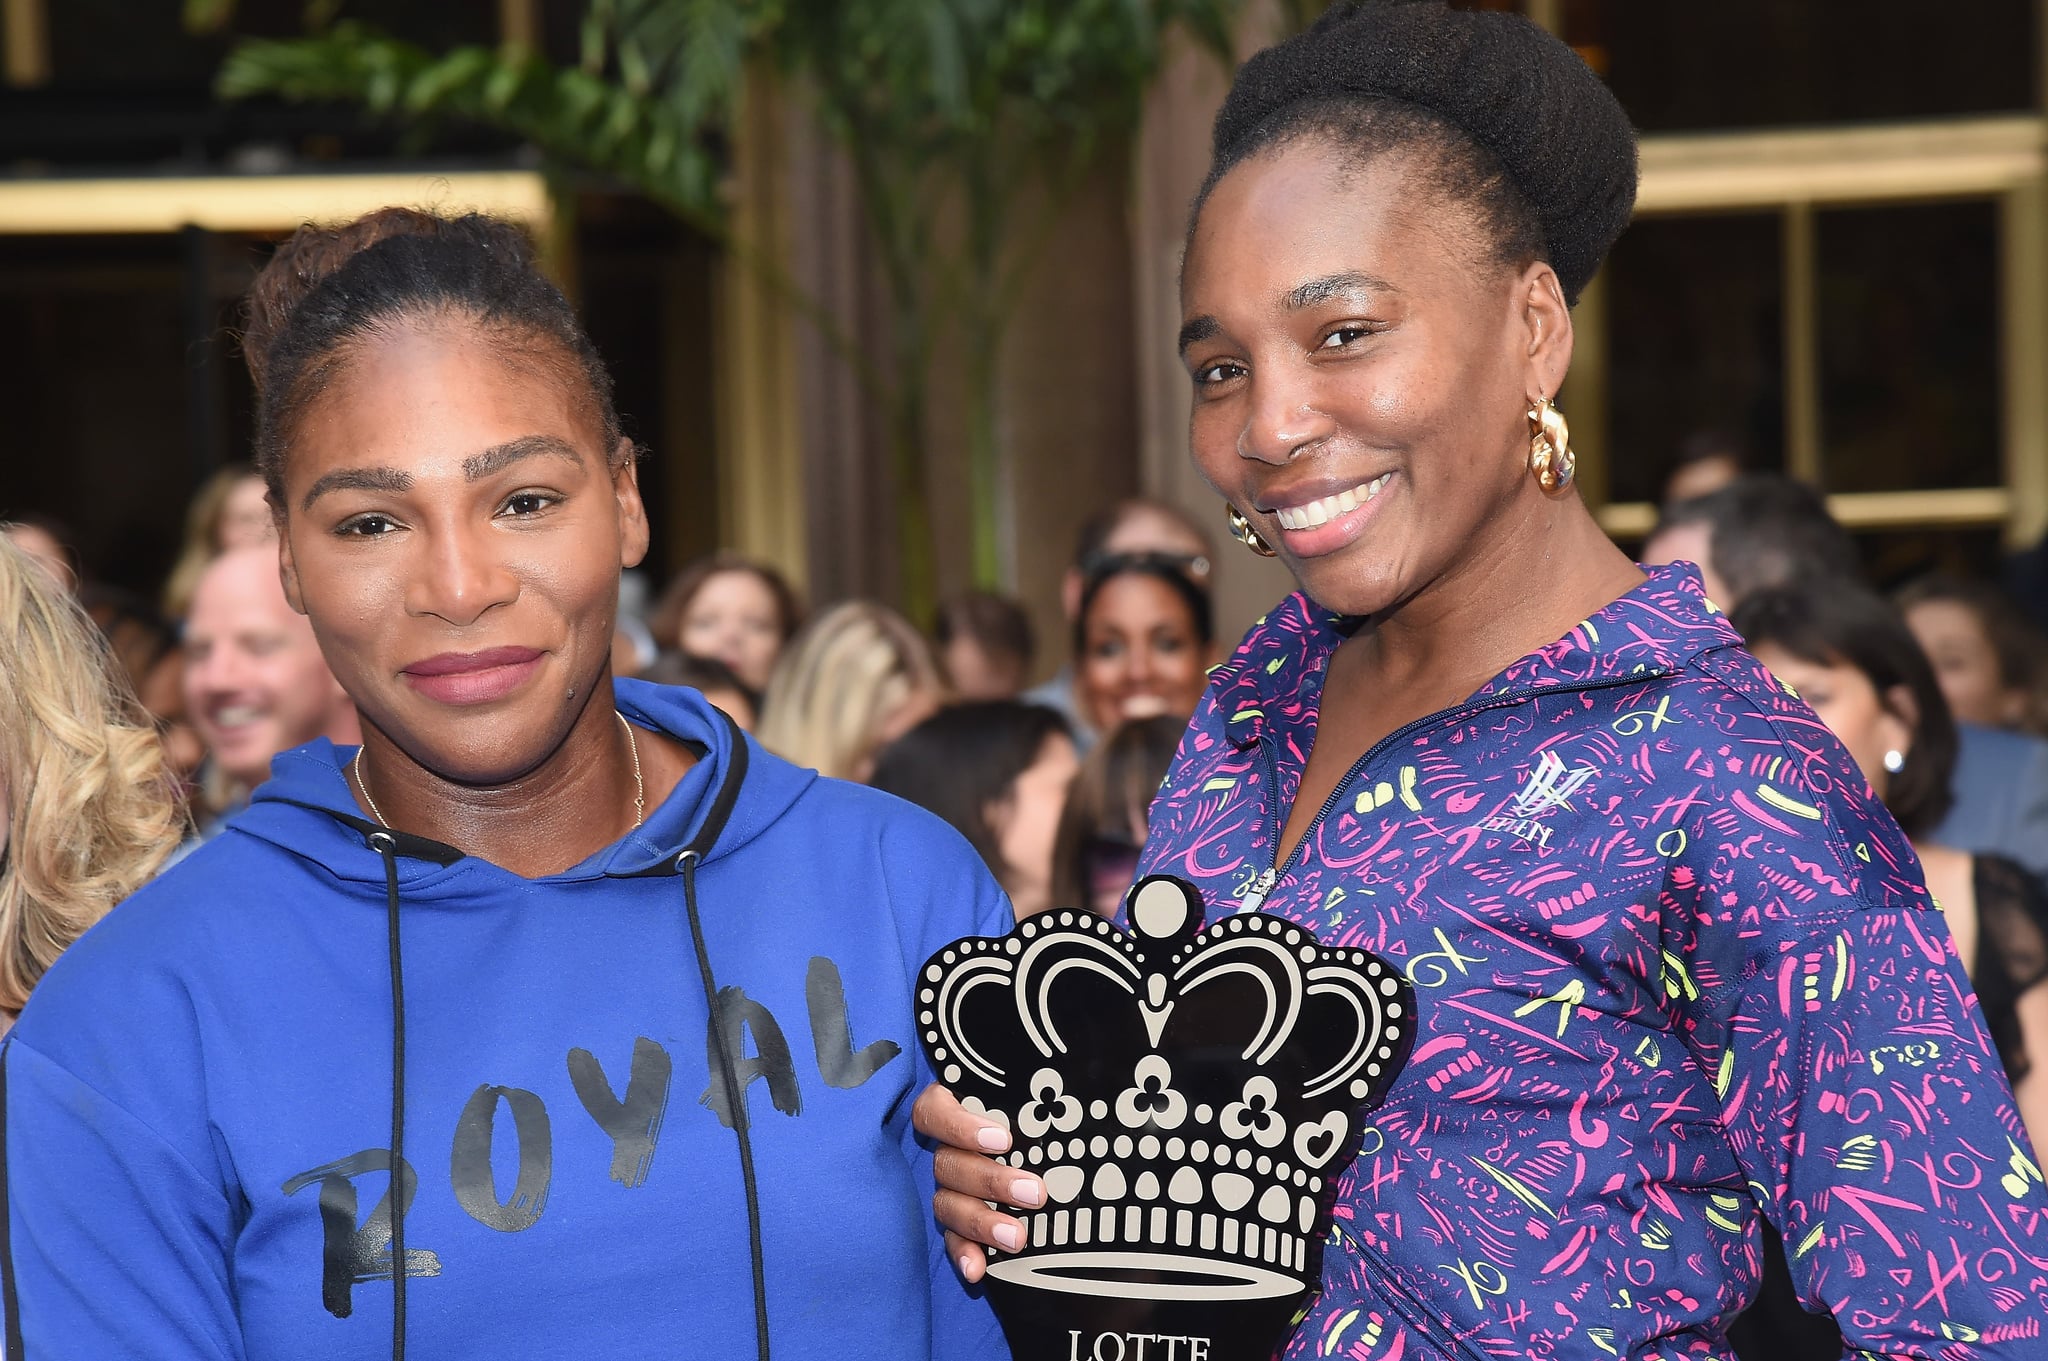 NEW YORK, NY - AUGUST 23: Serena Williams and Venus Williams pose during the 2018 Palace Invitational Badminton Tournament at Lotte New York Palace on August 23, 2018 in New York City.  (Photo by Gary Gershoff/WireImage)